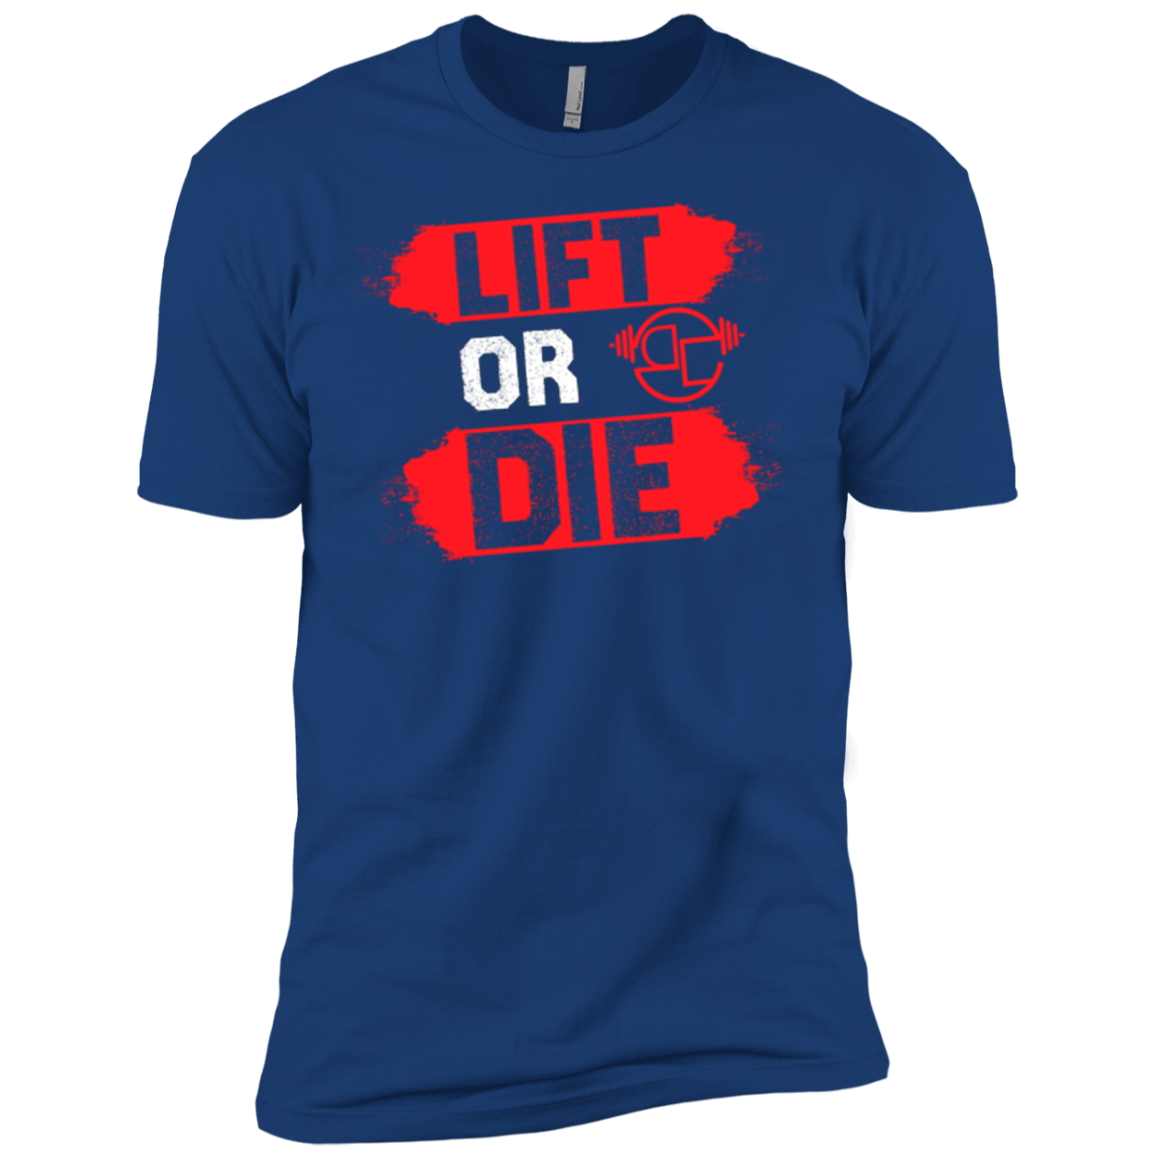 Lift or Die Limited Premium Short Sleeve T-Shirt